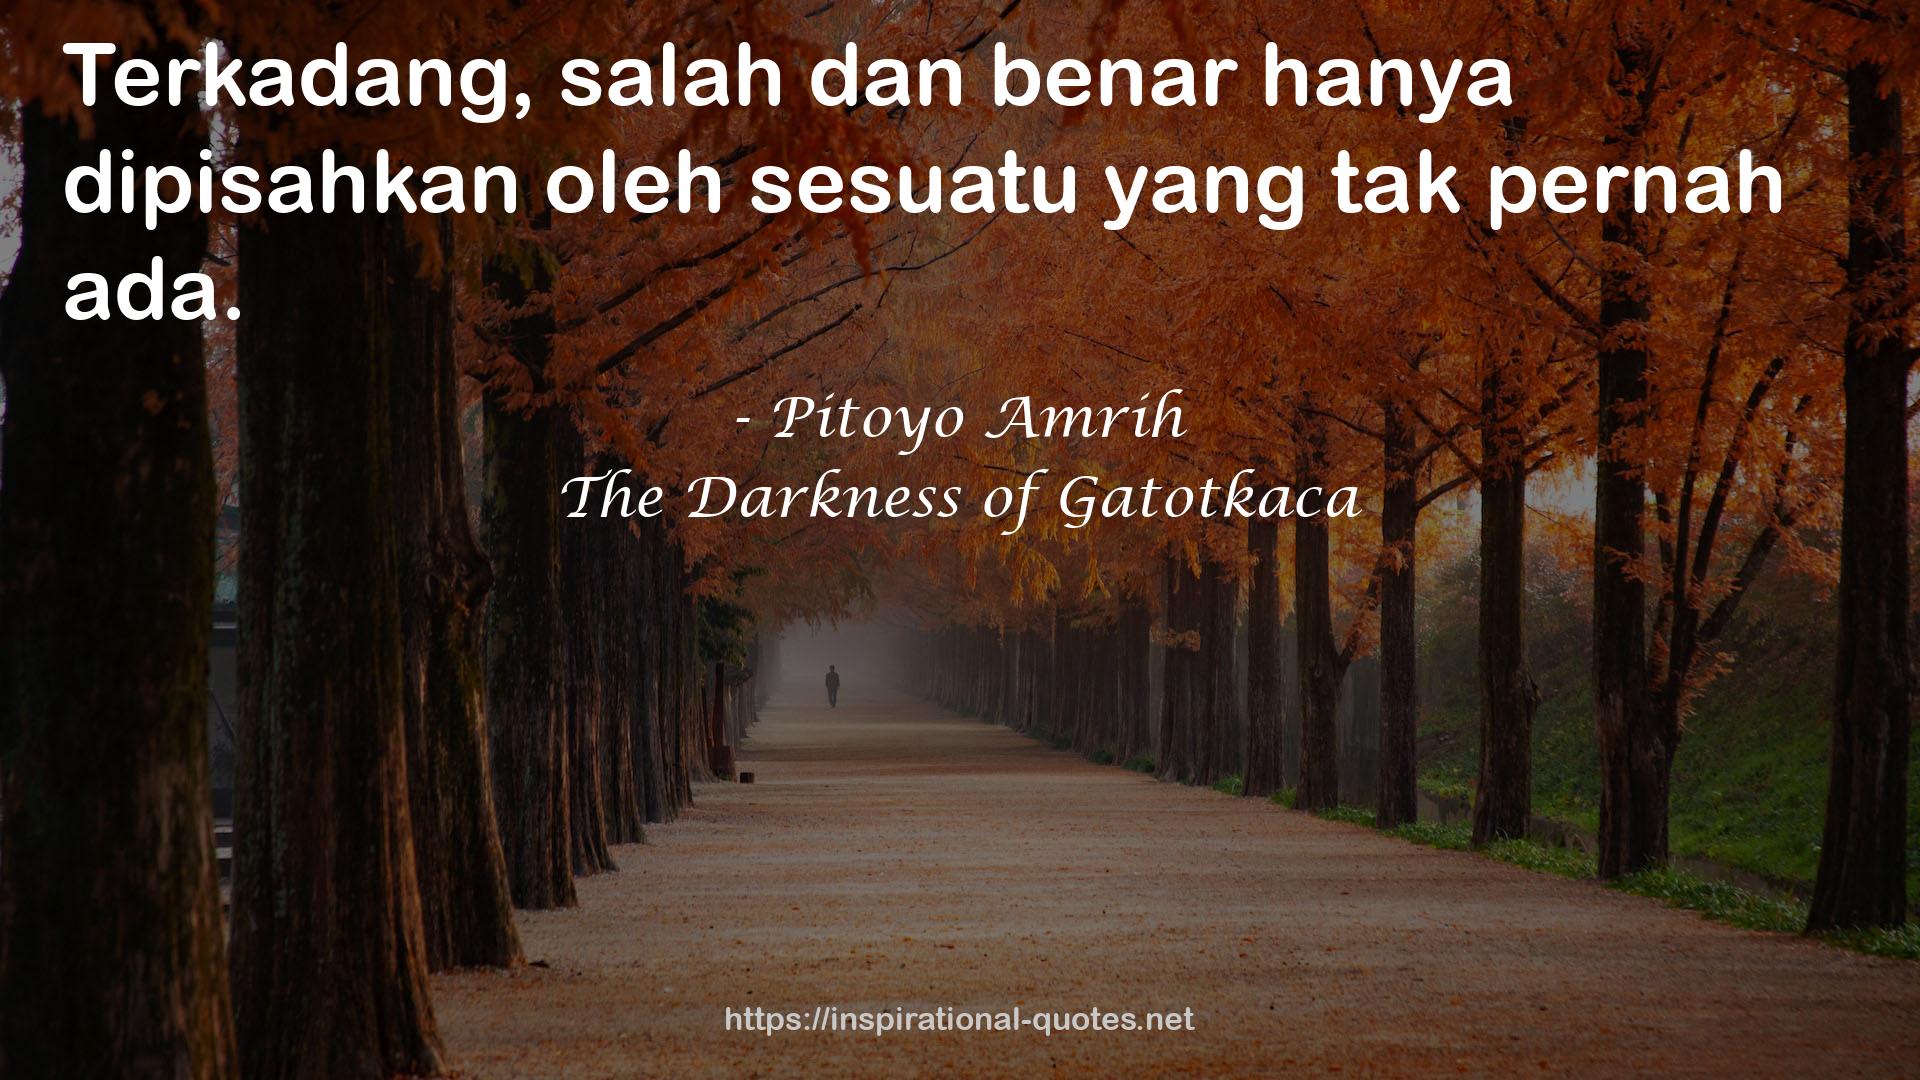 The Darkness of Gatotkaca QUOTES